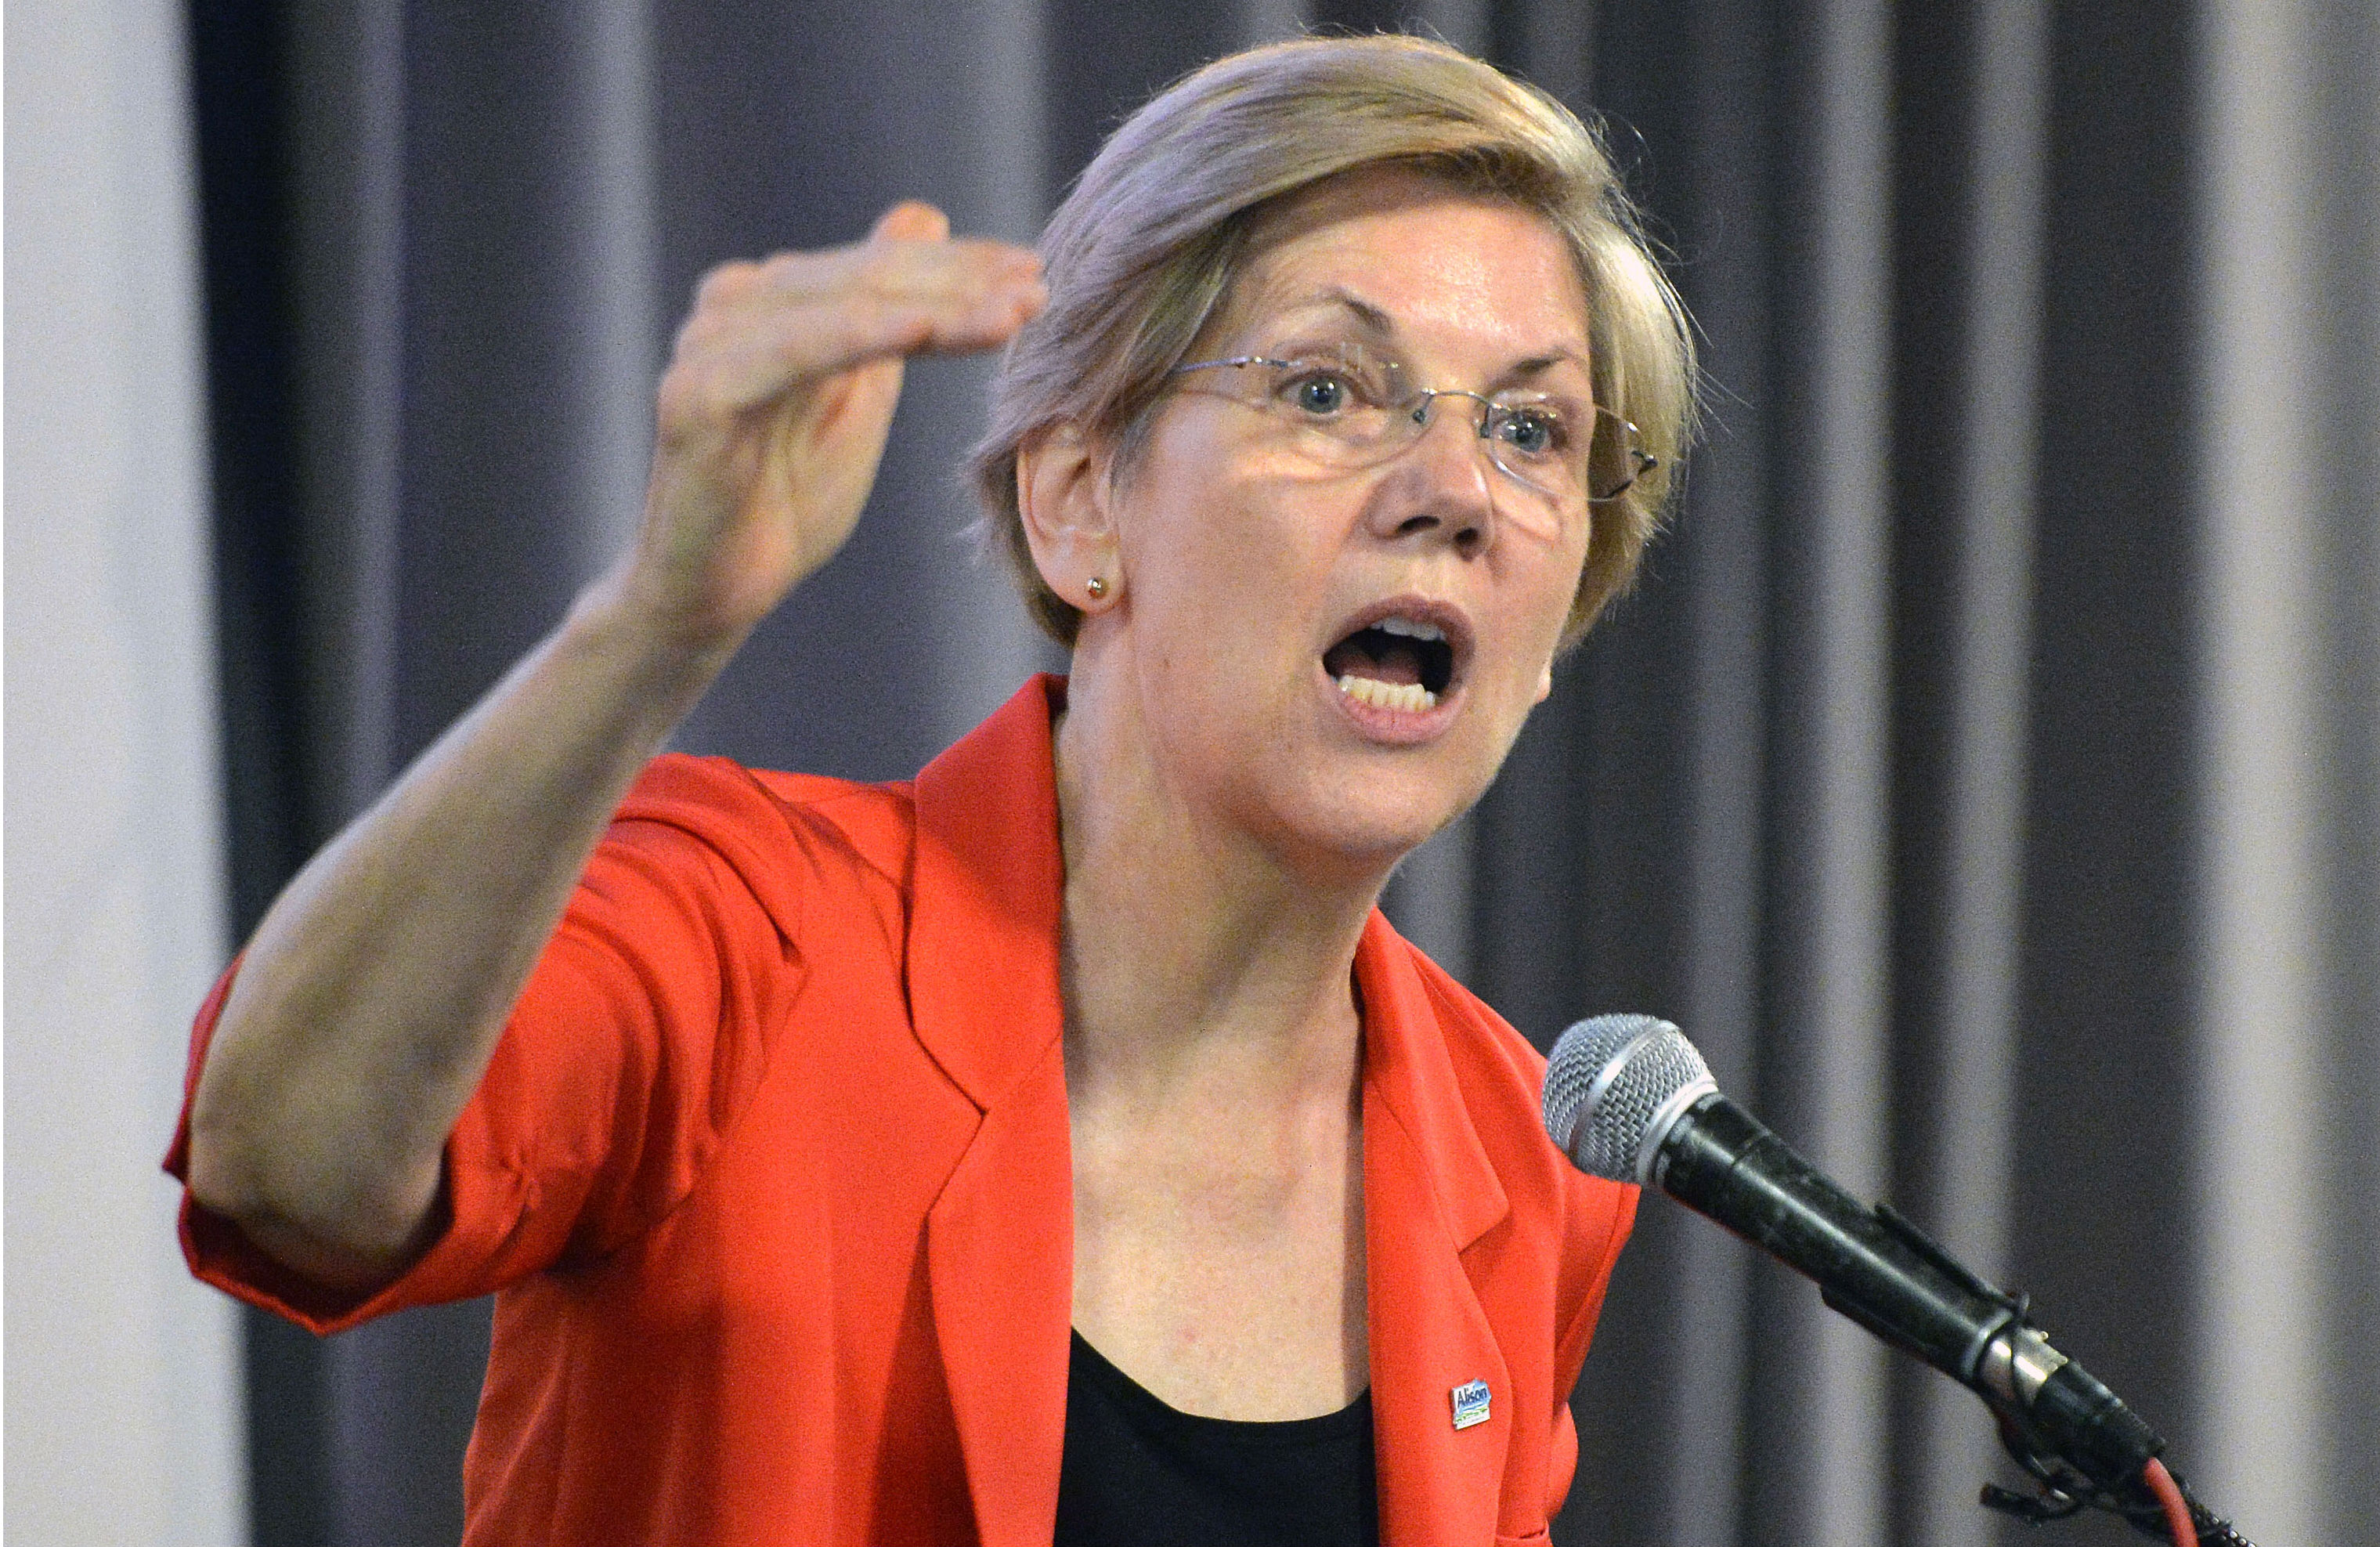 If Elizabeth Warren Were Running for President, This Would Be Her Agenda